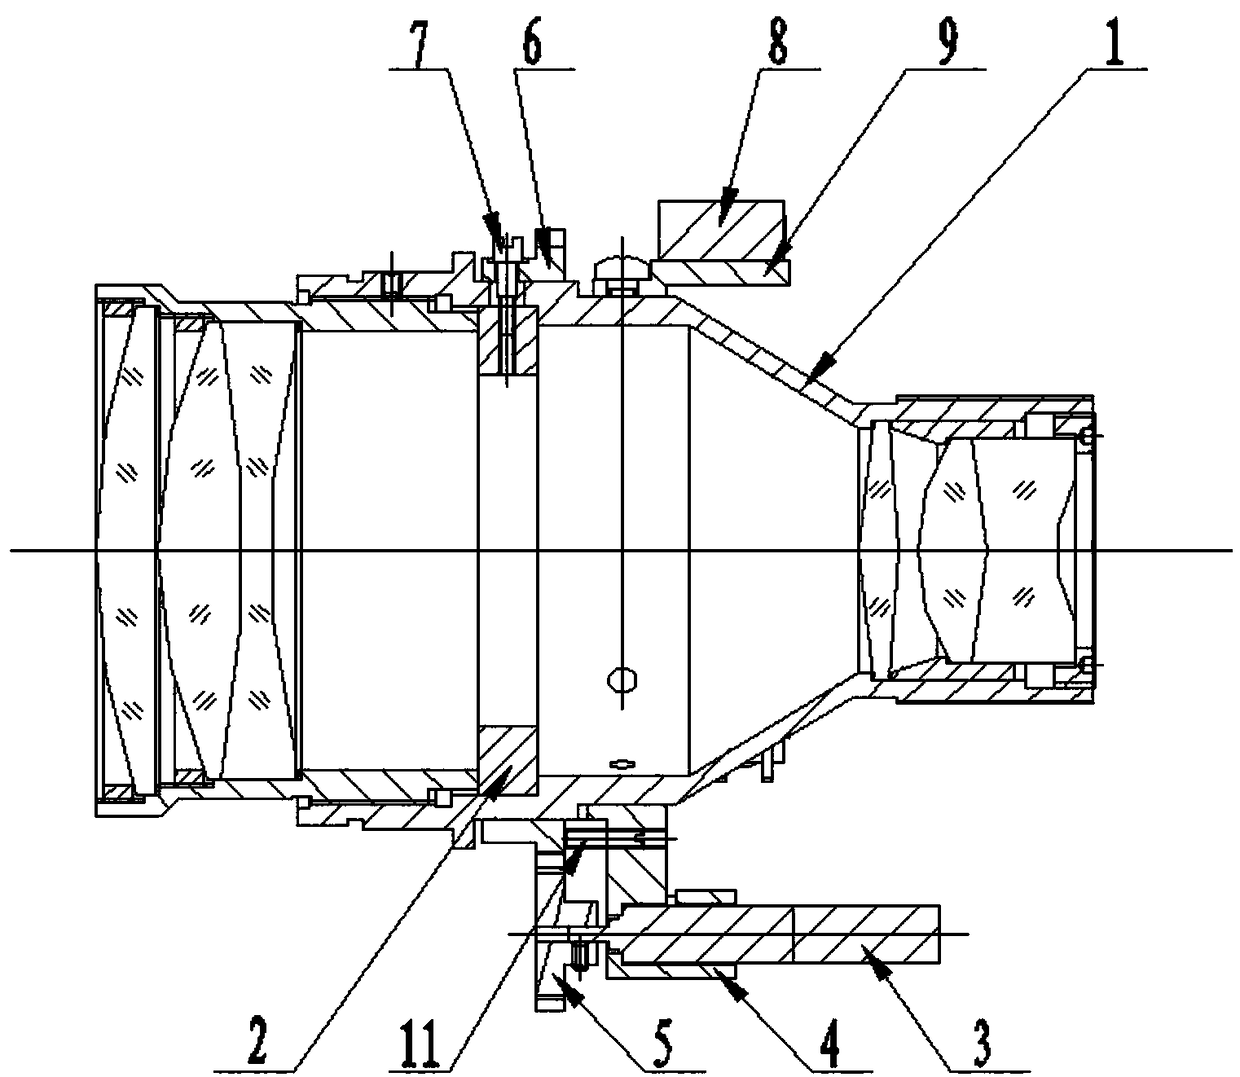 A structure for automatically adjusting the aperture diameter of a diaphragm